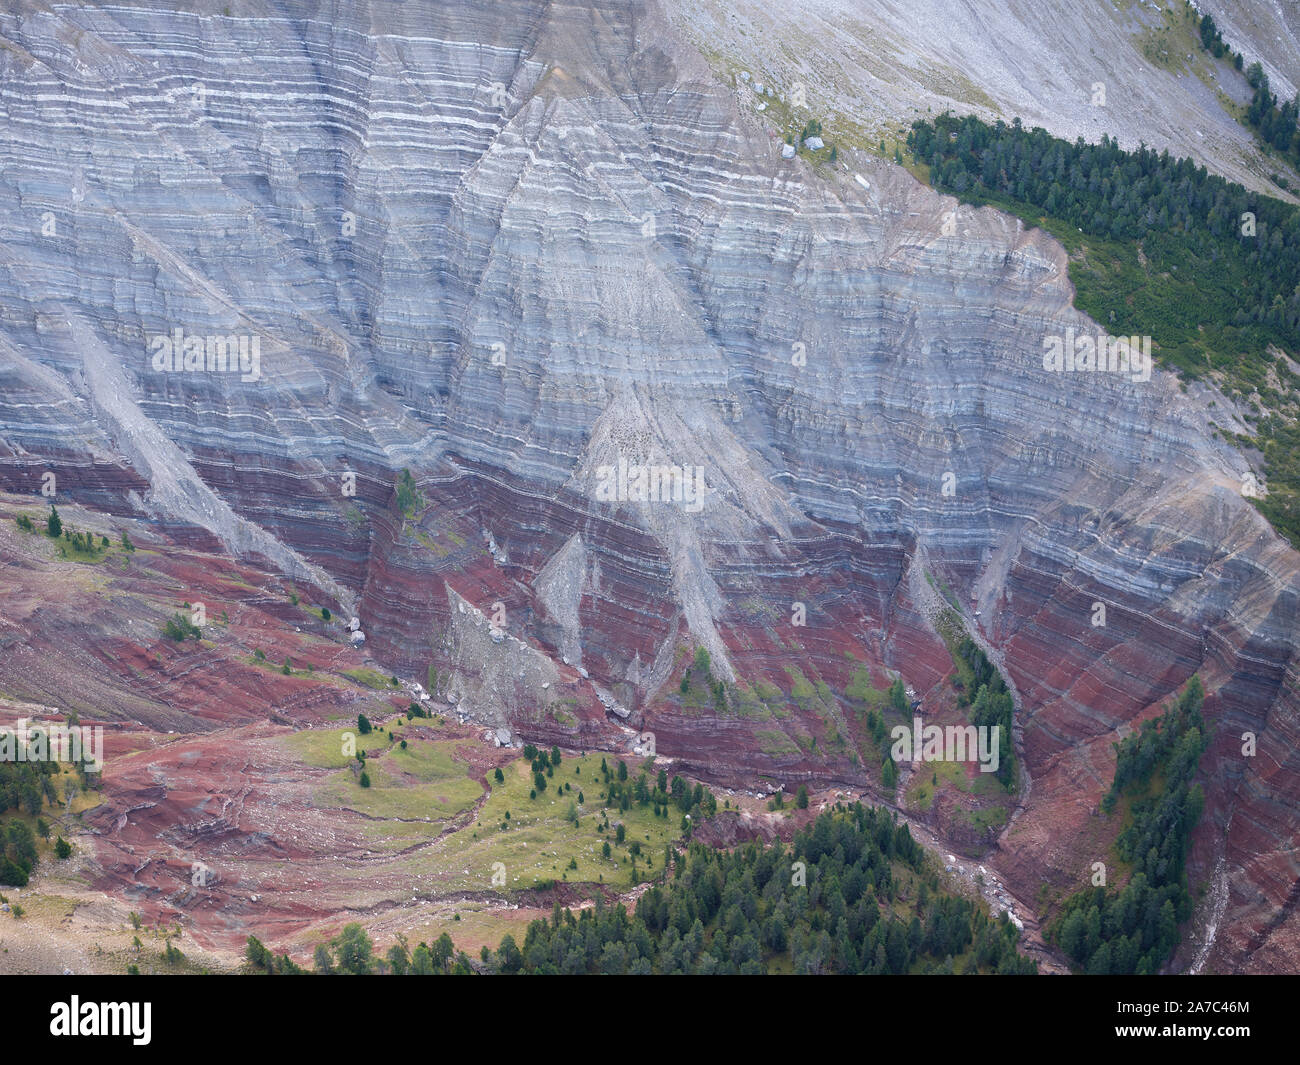 AERIAL VIEW. Multicolored strata on a steep slope of sedimentary rocks. Seceda, Val Gardena, Dolomites, South-Tyrol, Italy. Stock Photo